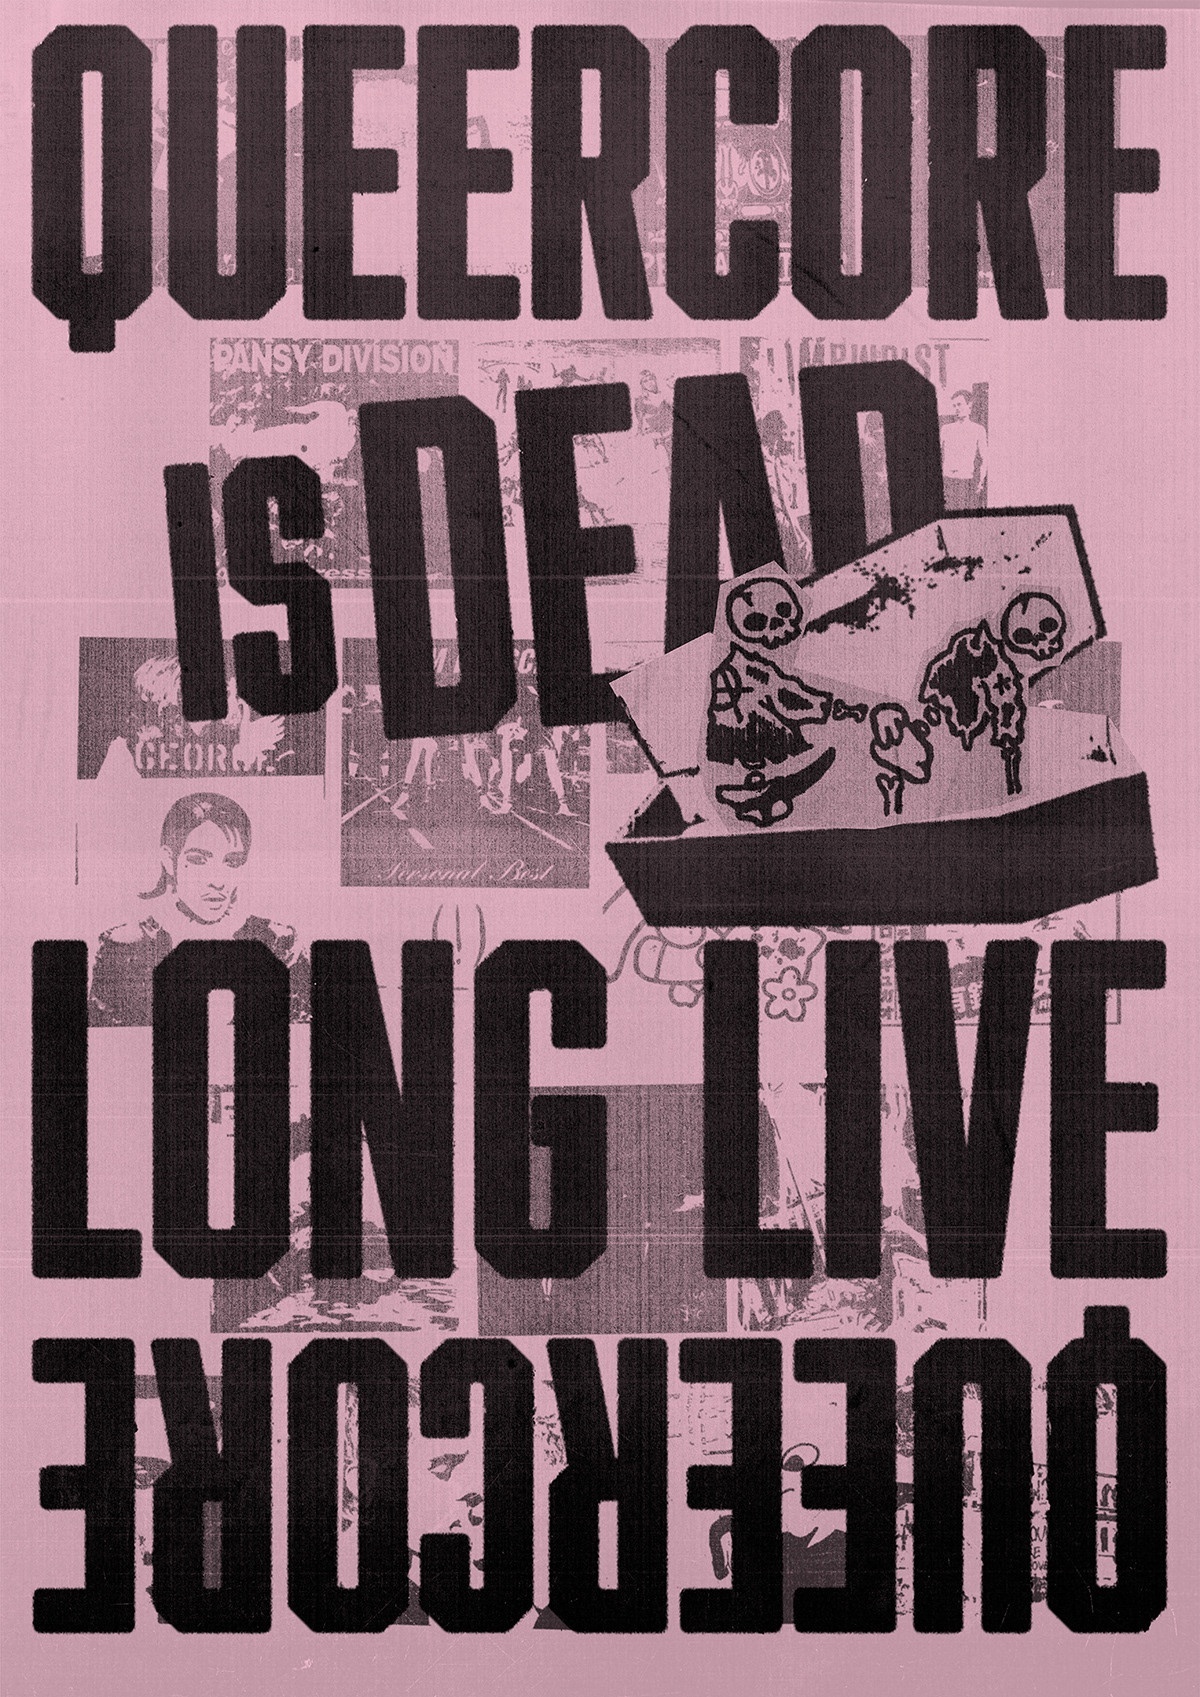 Multimedia collage in pink, black, and gray with text "Queercore is dead" and "Long live queercore."